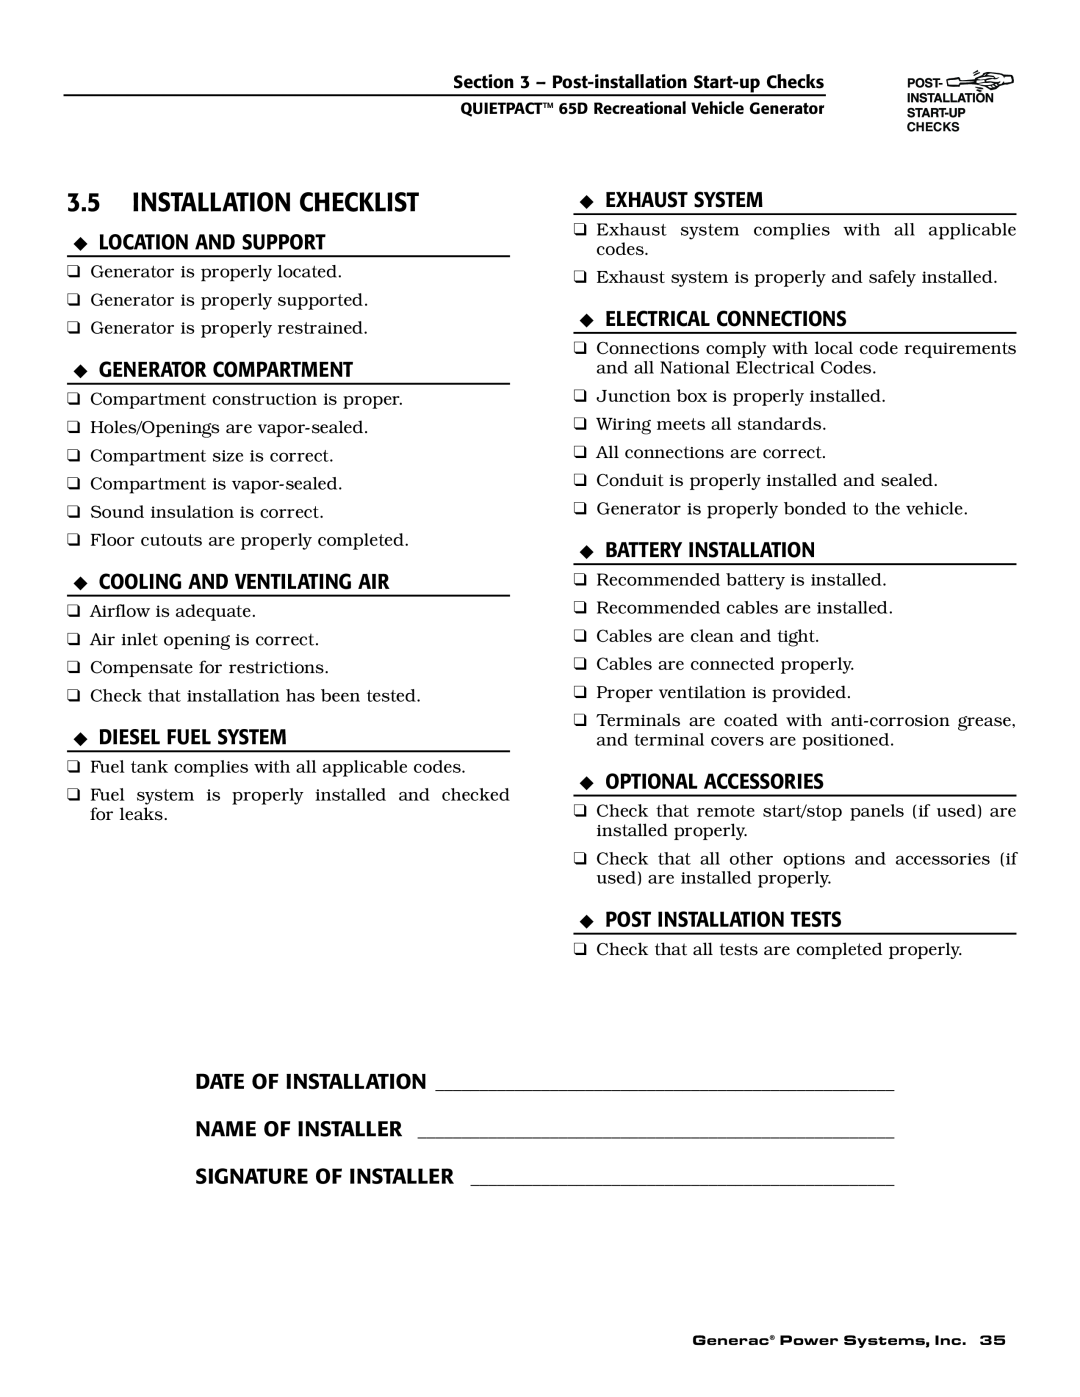 Generac 004614-1 Installation Checklist, Location And Support, Generator Compartment, Cooling And Ventilating Air 